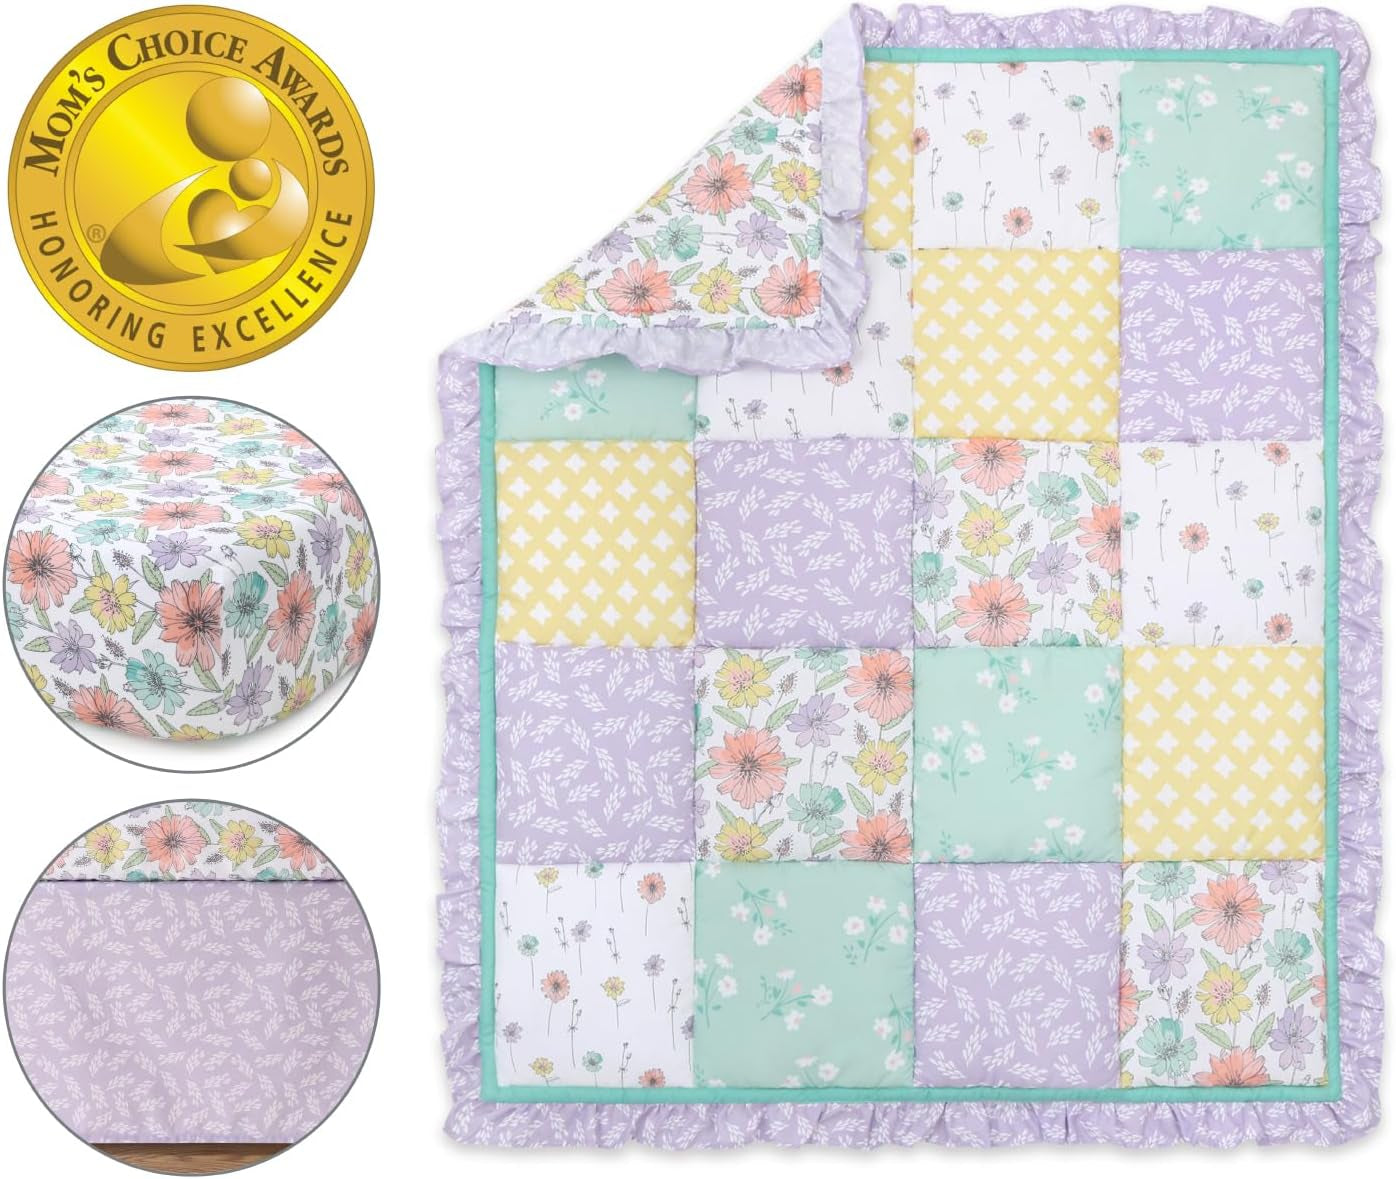 Crib Bedding Set for Girls, 3 Pc Shabby Chic Baby Bedding, Lavender and Vintage Floral Nursery Decor